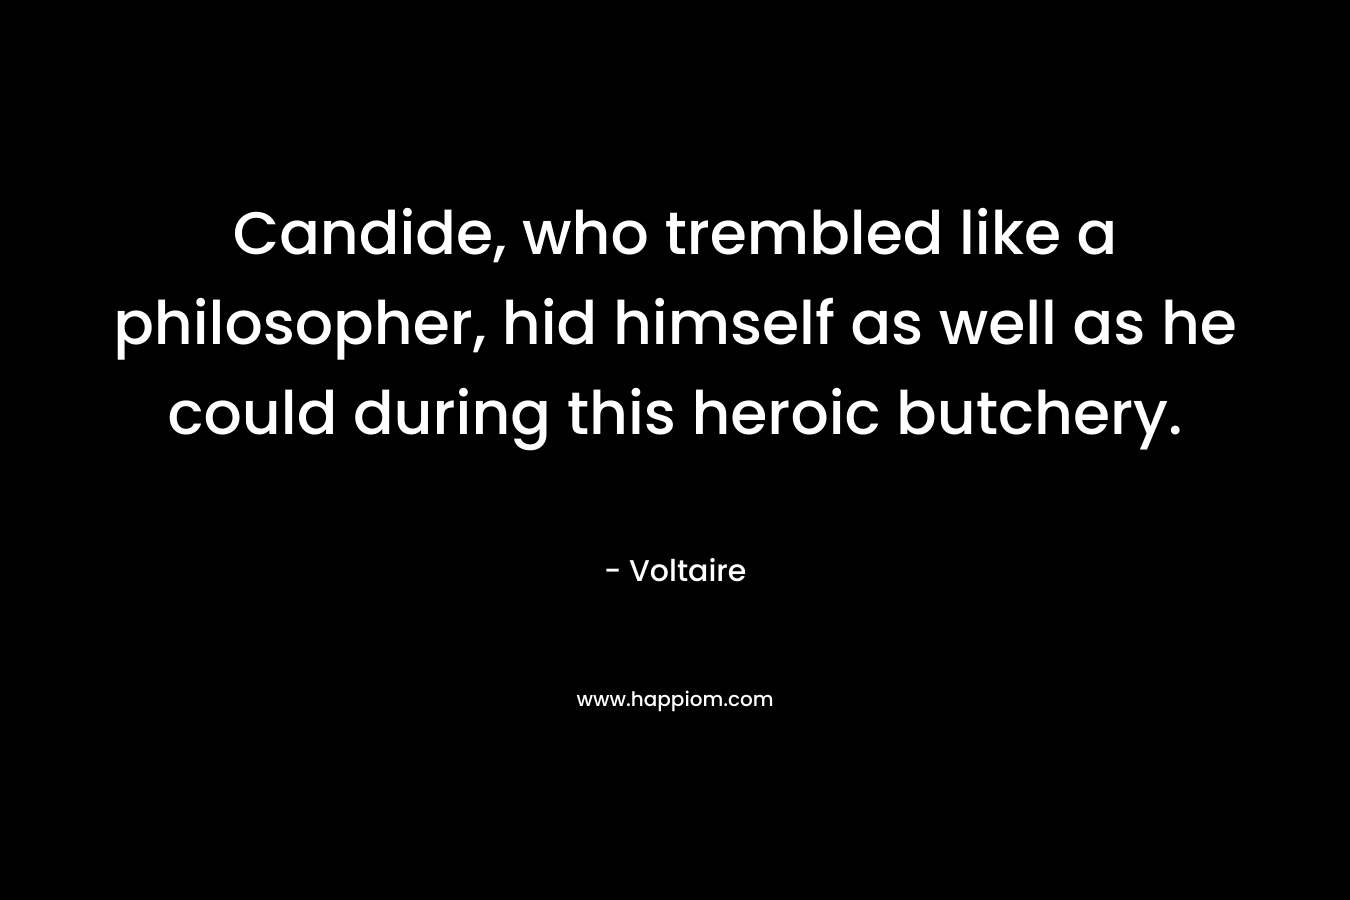 Candide, who trembled like a philosopher, hid himself as well as he could during this heroic butchery.